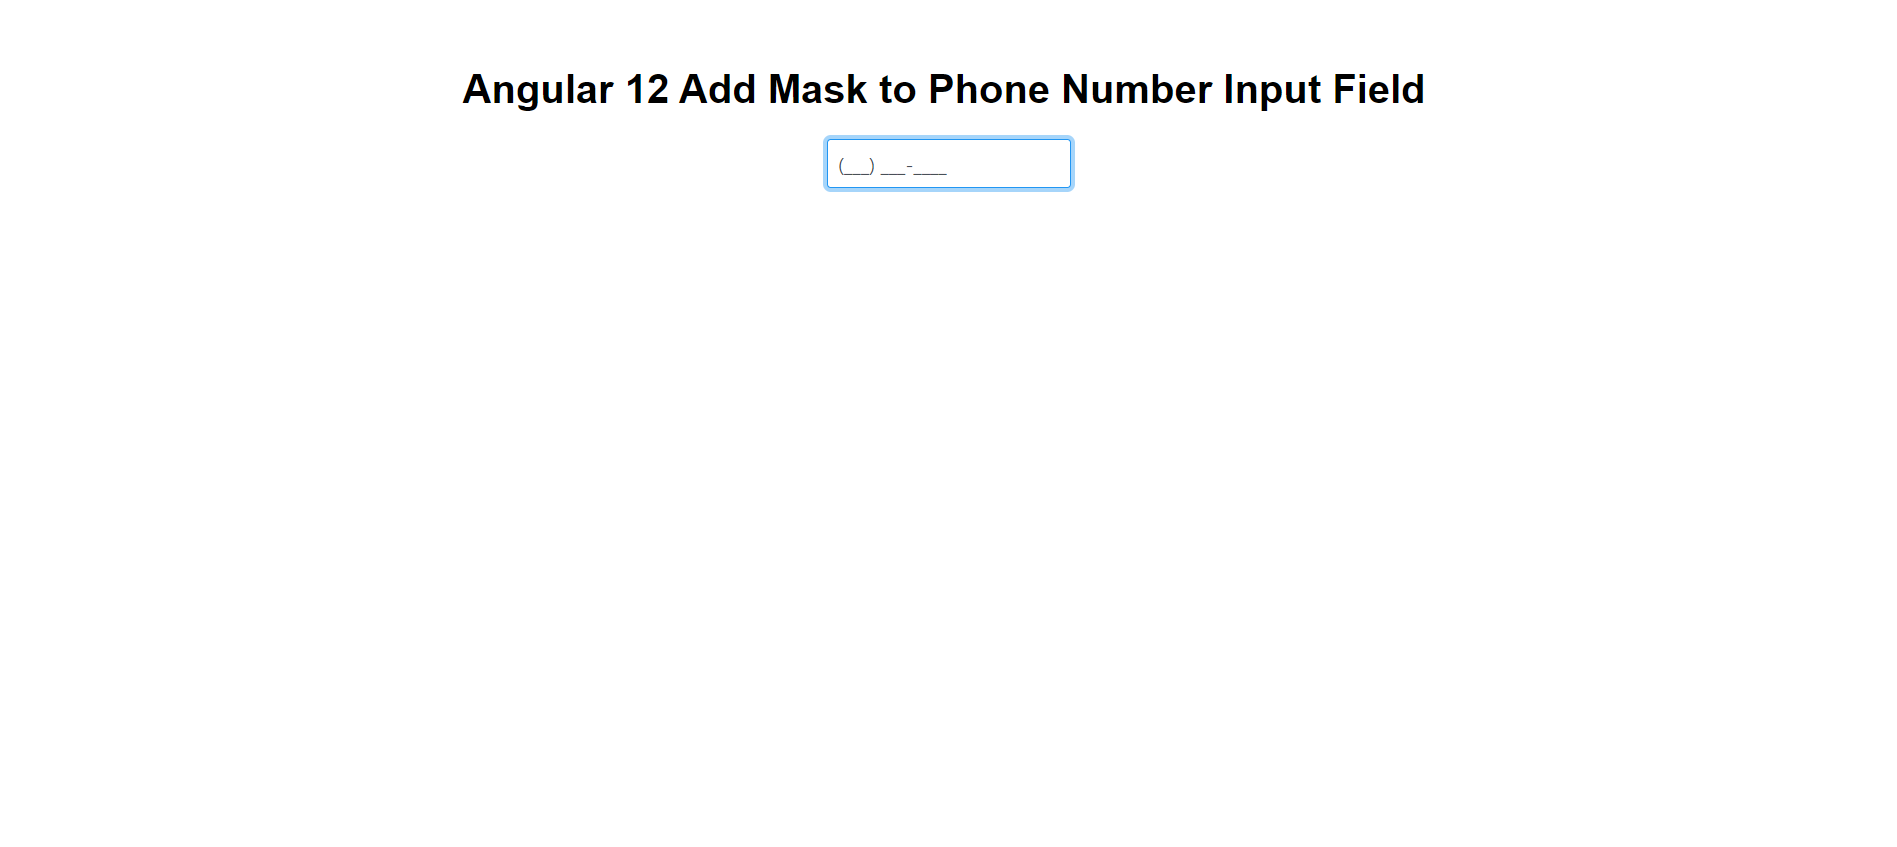 Angular 12 Add Mask to Phone Number Input Field